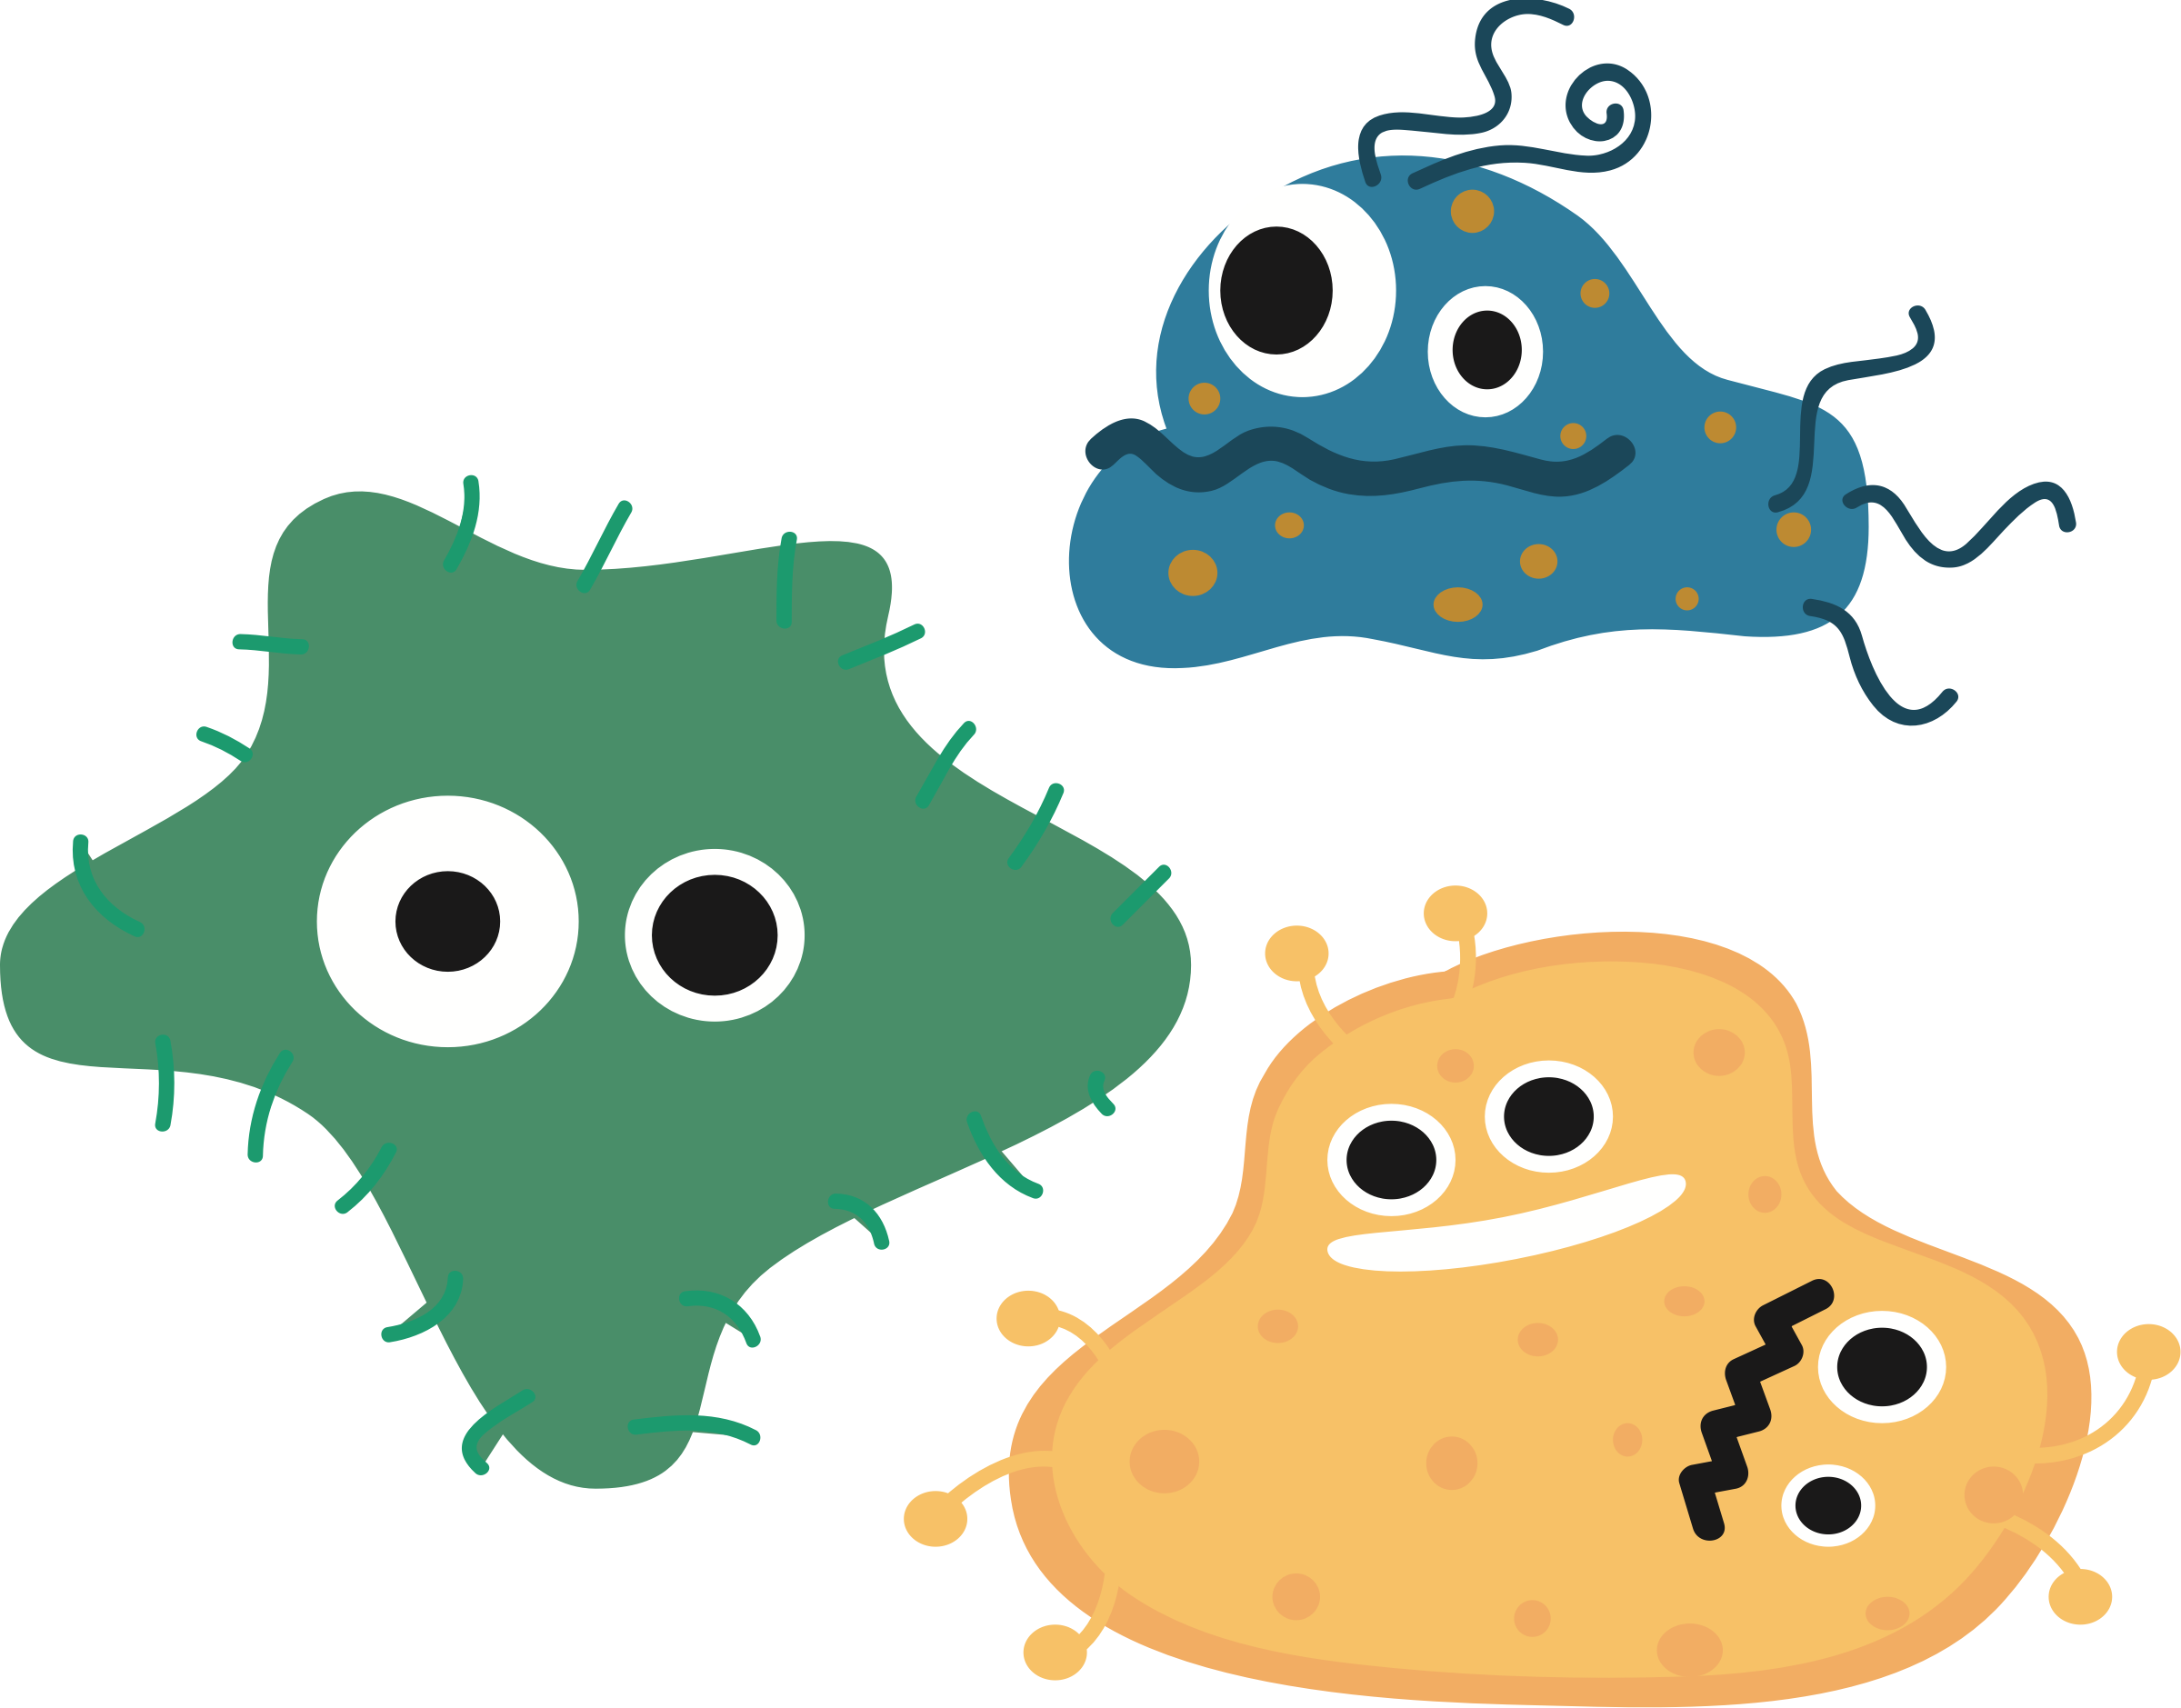 germs clipart microorganism